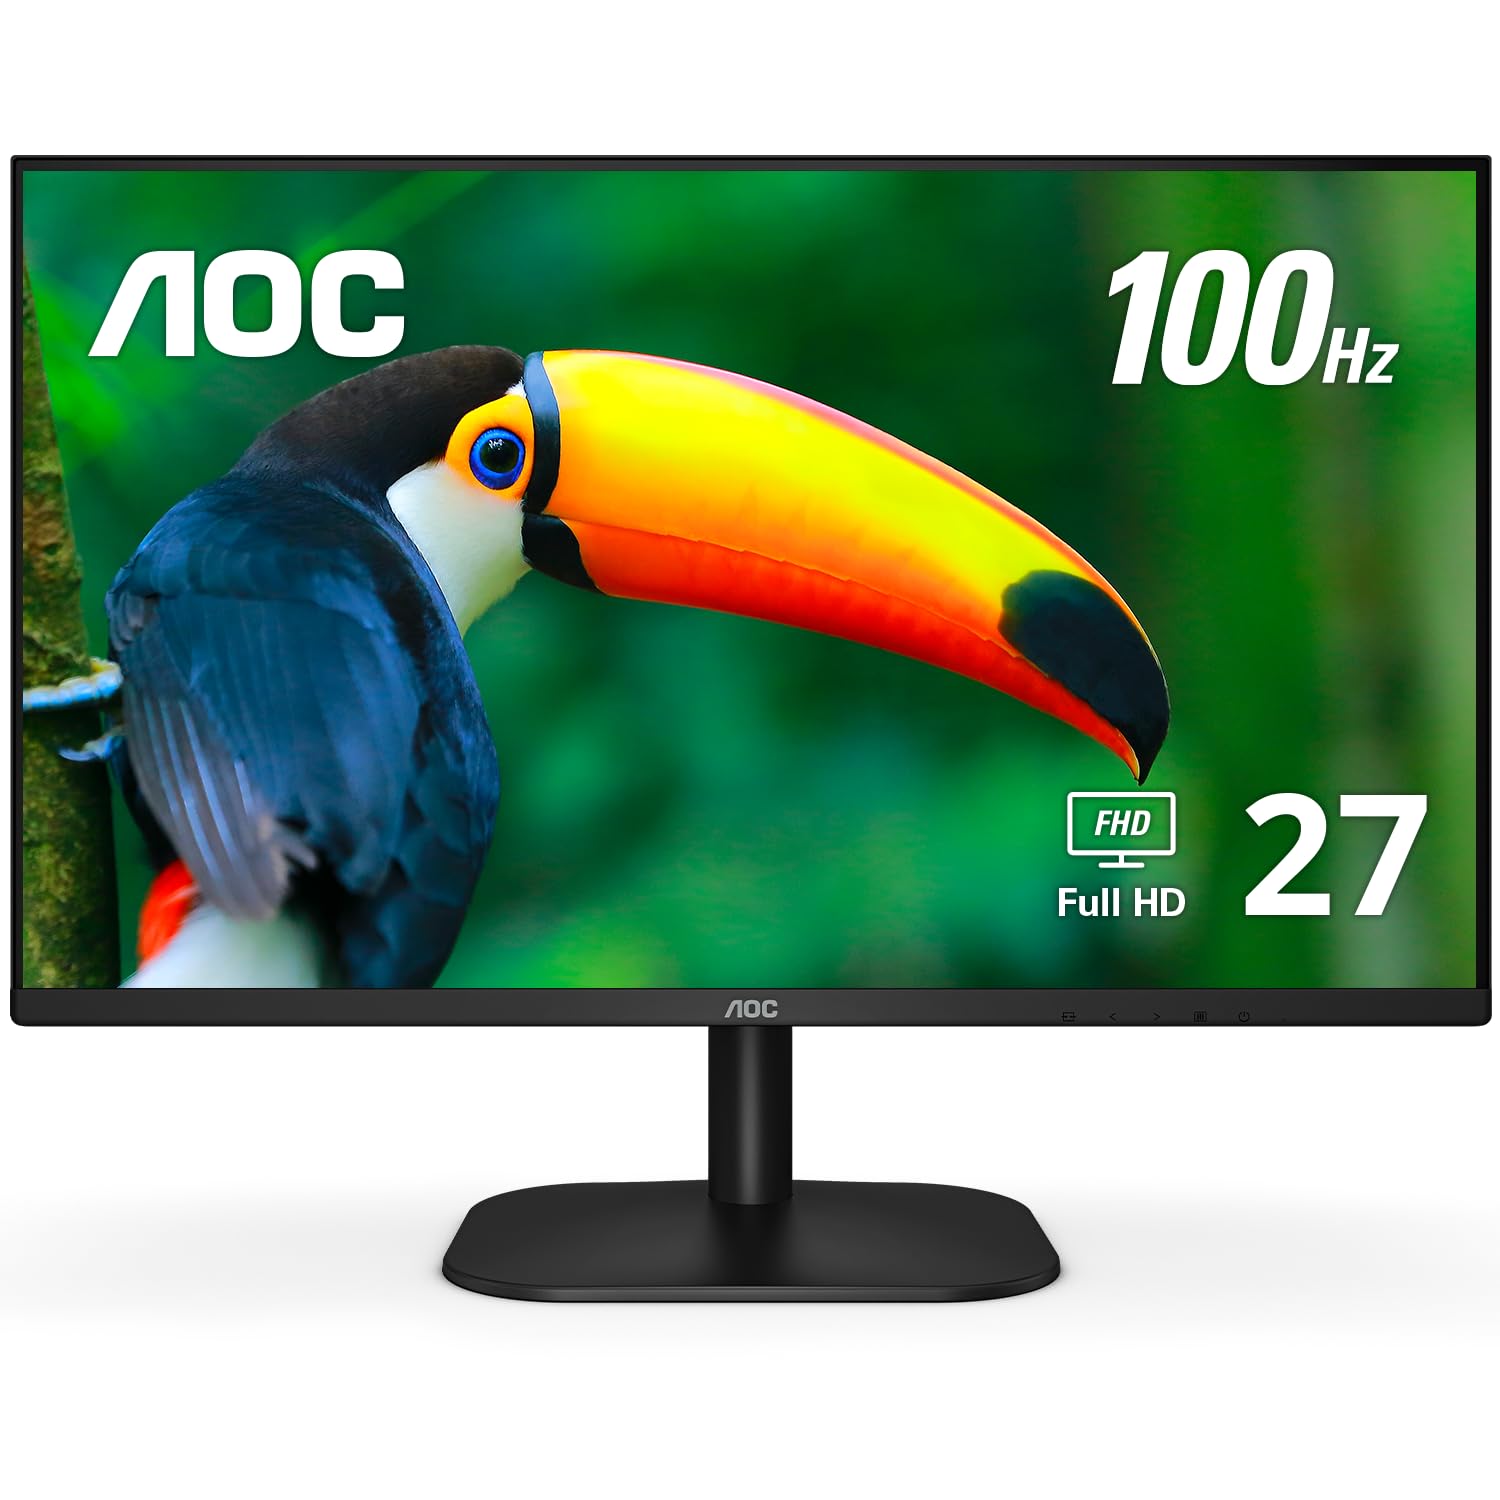 AOC 27B2H2 27” Frameless IPS Monitor, FHD 1920x1080, 100Hz, 101% sRGB, for Home and Office, HDMI and VGA Input, Low Blue Mode, VESA Compatible,Black